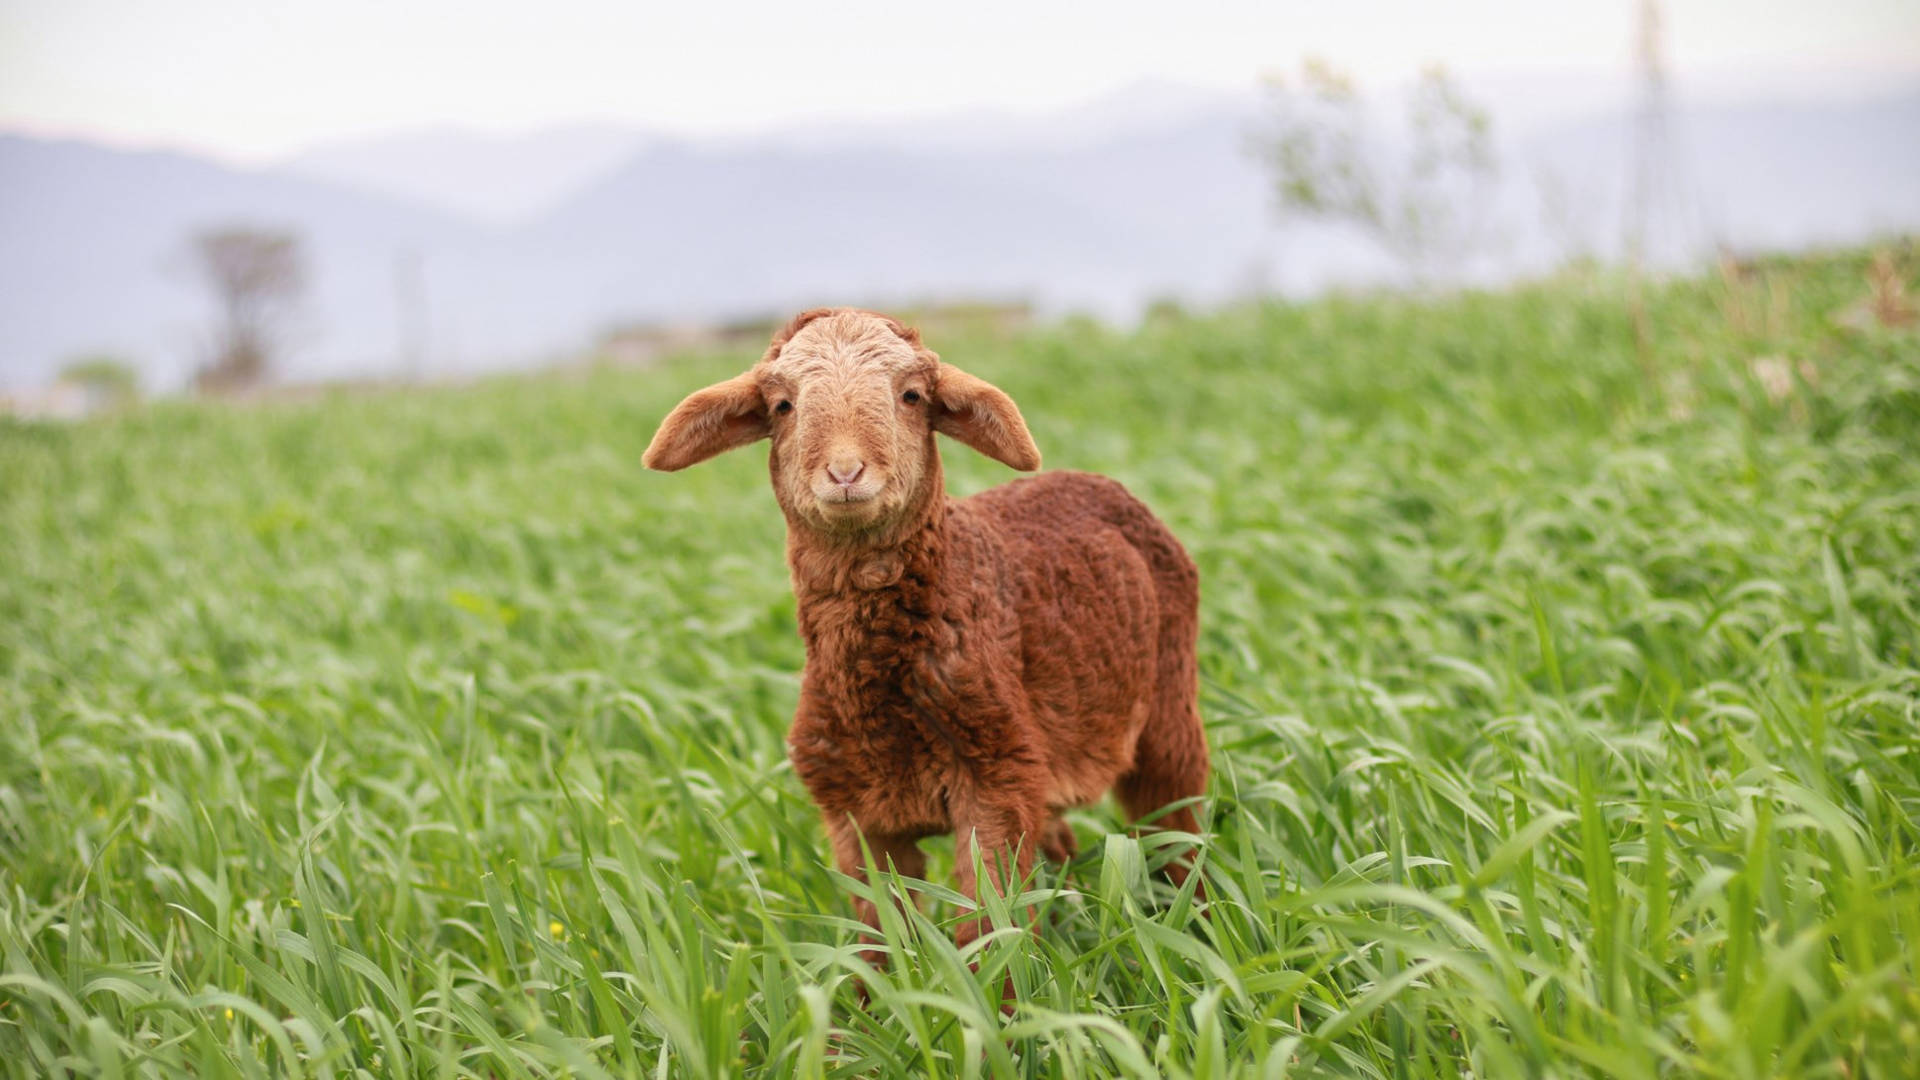 Brown Furry Baby Goat On Grassy Field Wallpaper